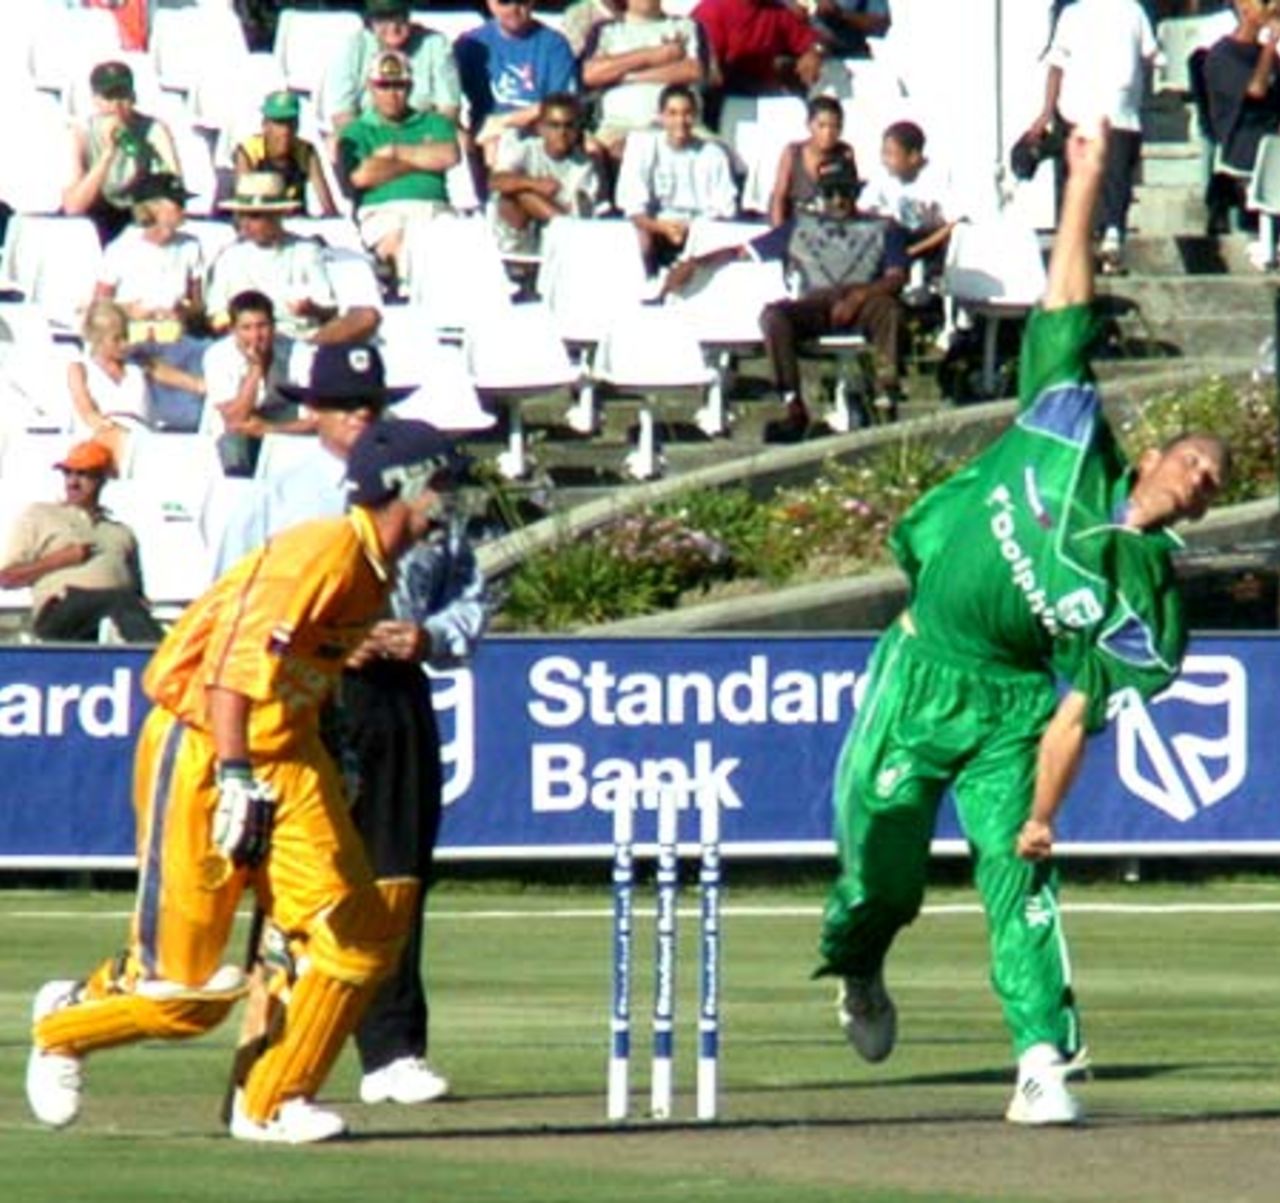 John Kent sends down a delivery why Stephen Cook backs-up at the non-strikers end